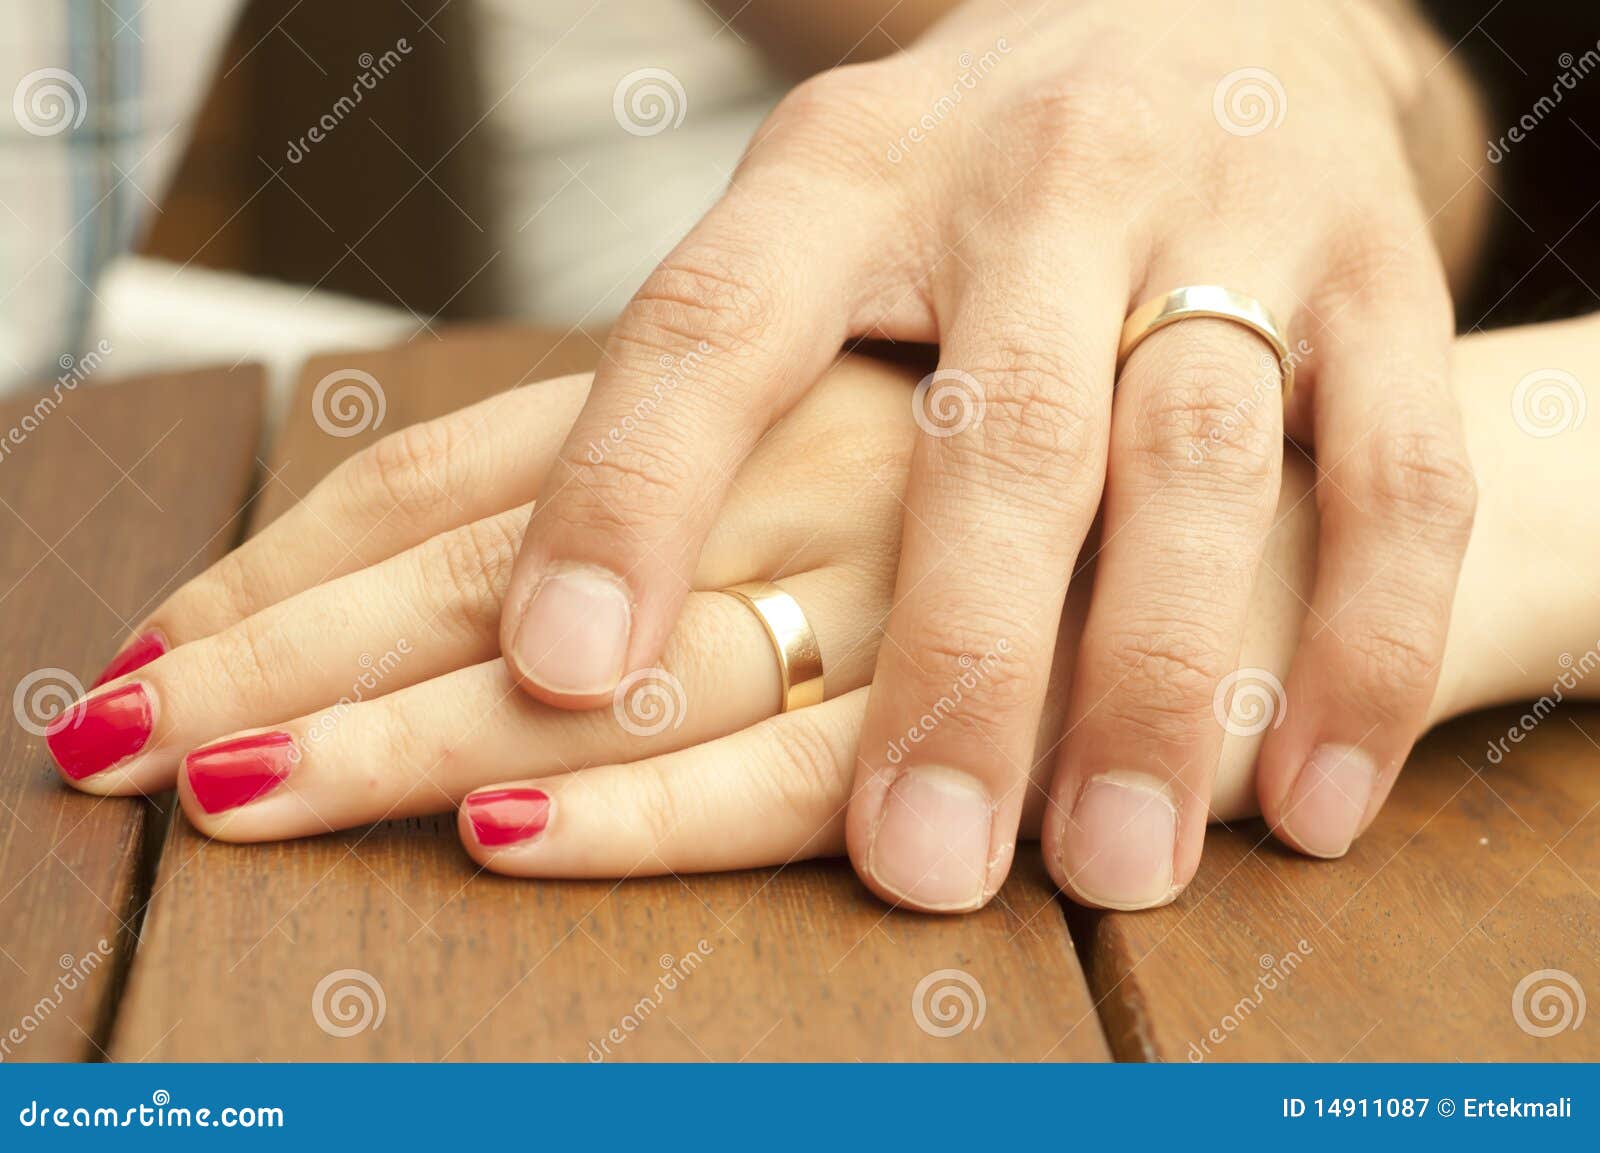 young married couple holding hands closeup